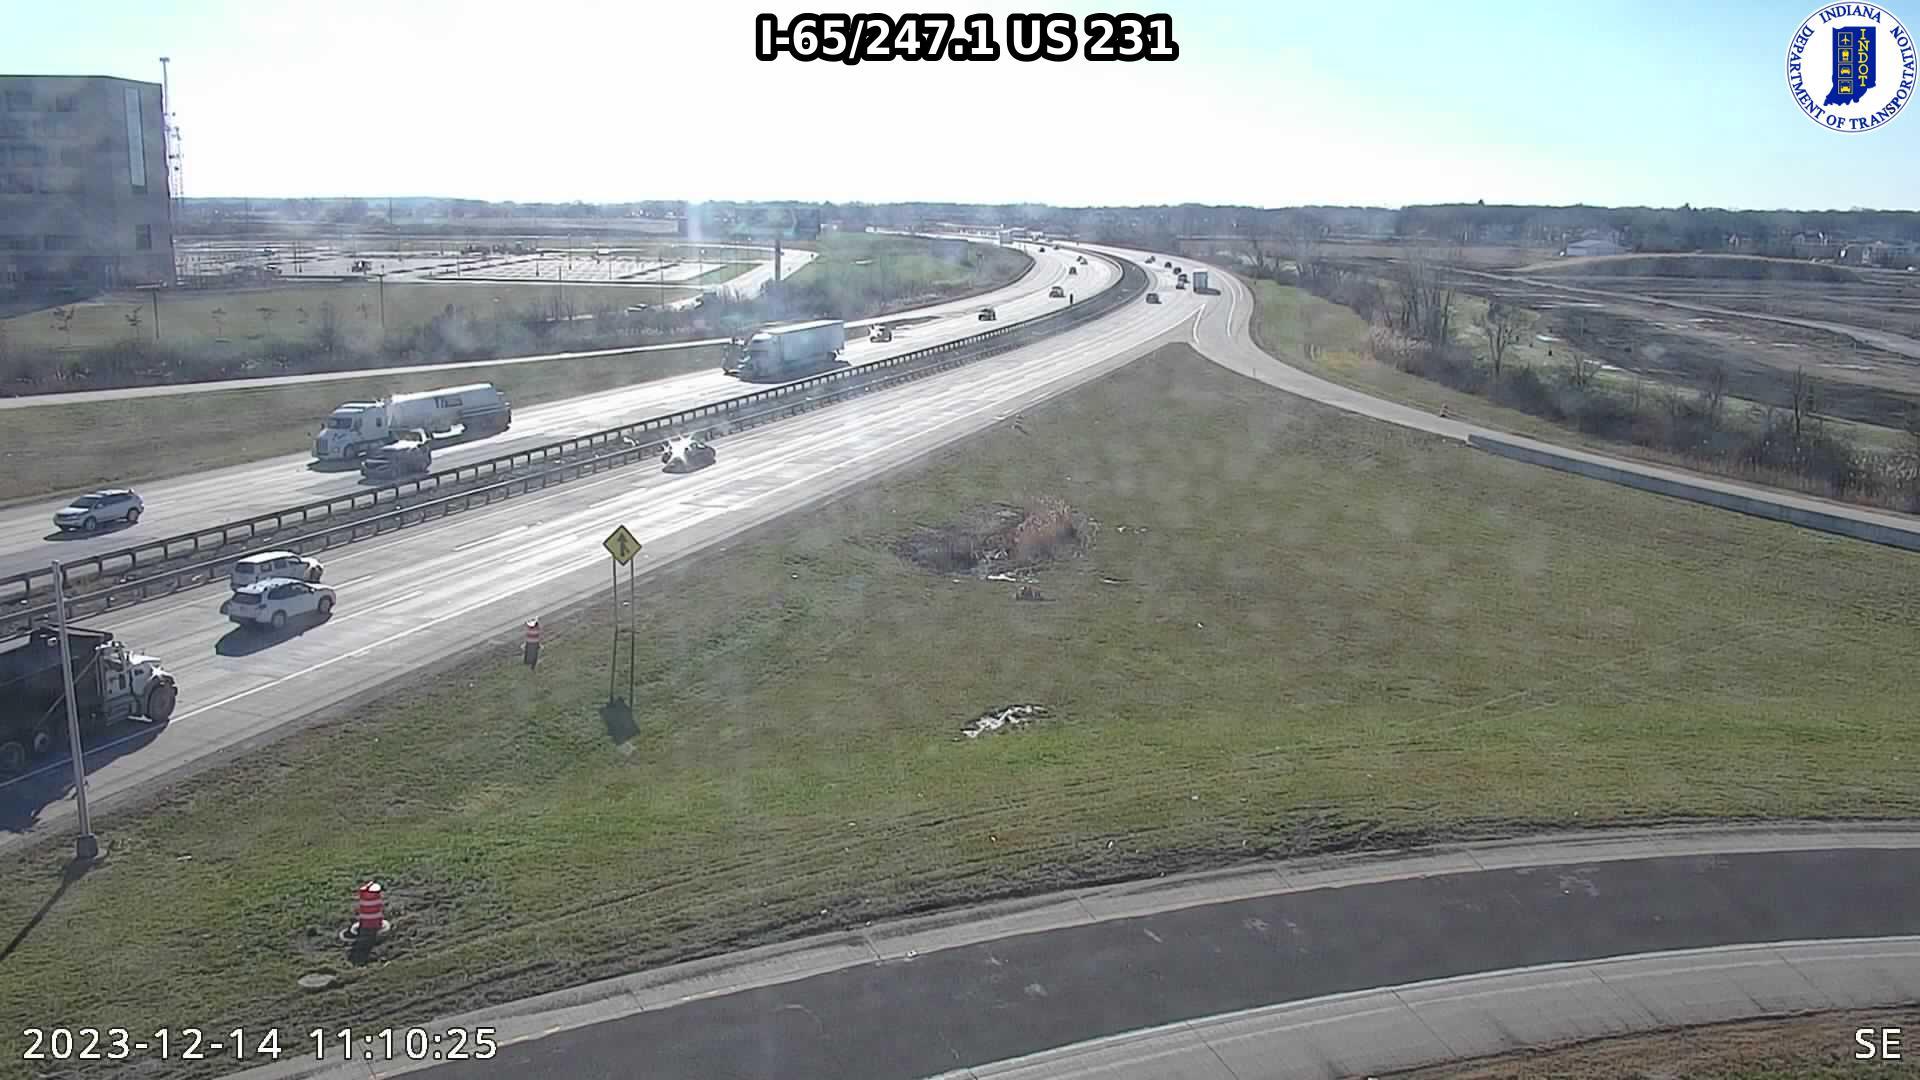 Traffic Cam Crown Point: I-65: I-65/247.1 US 231 Player